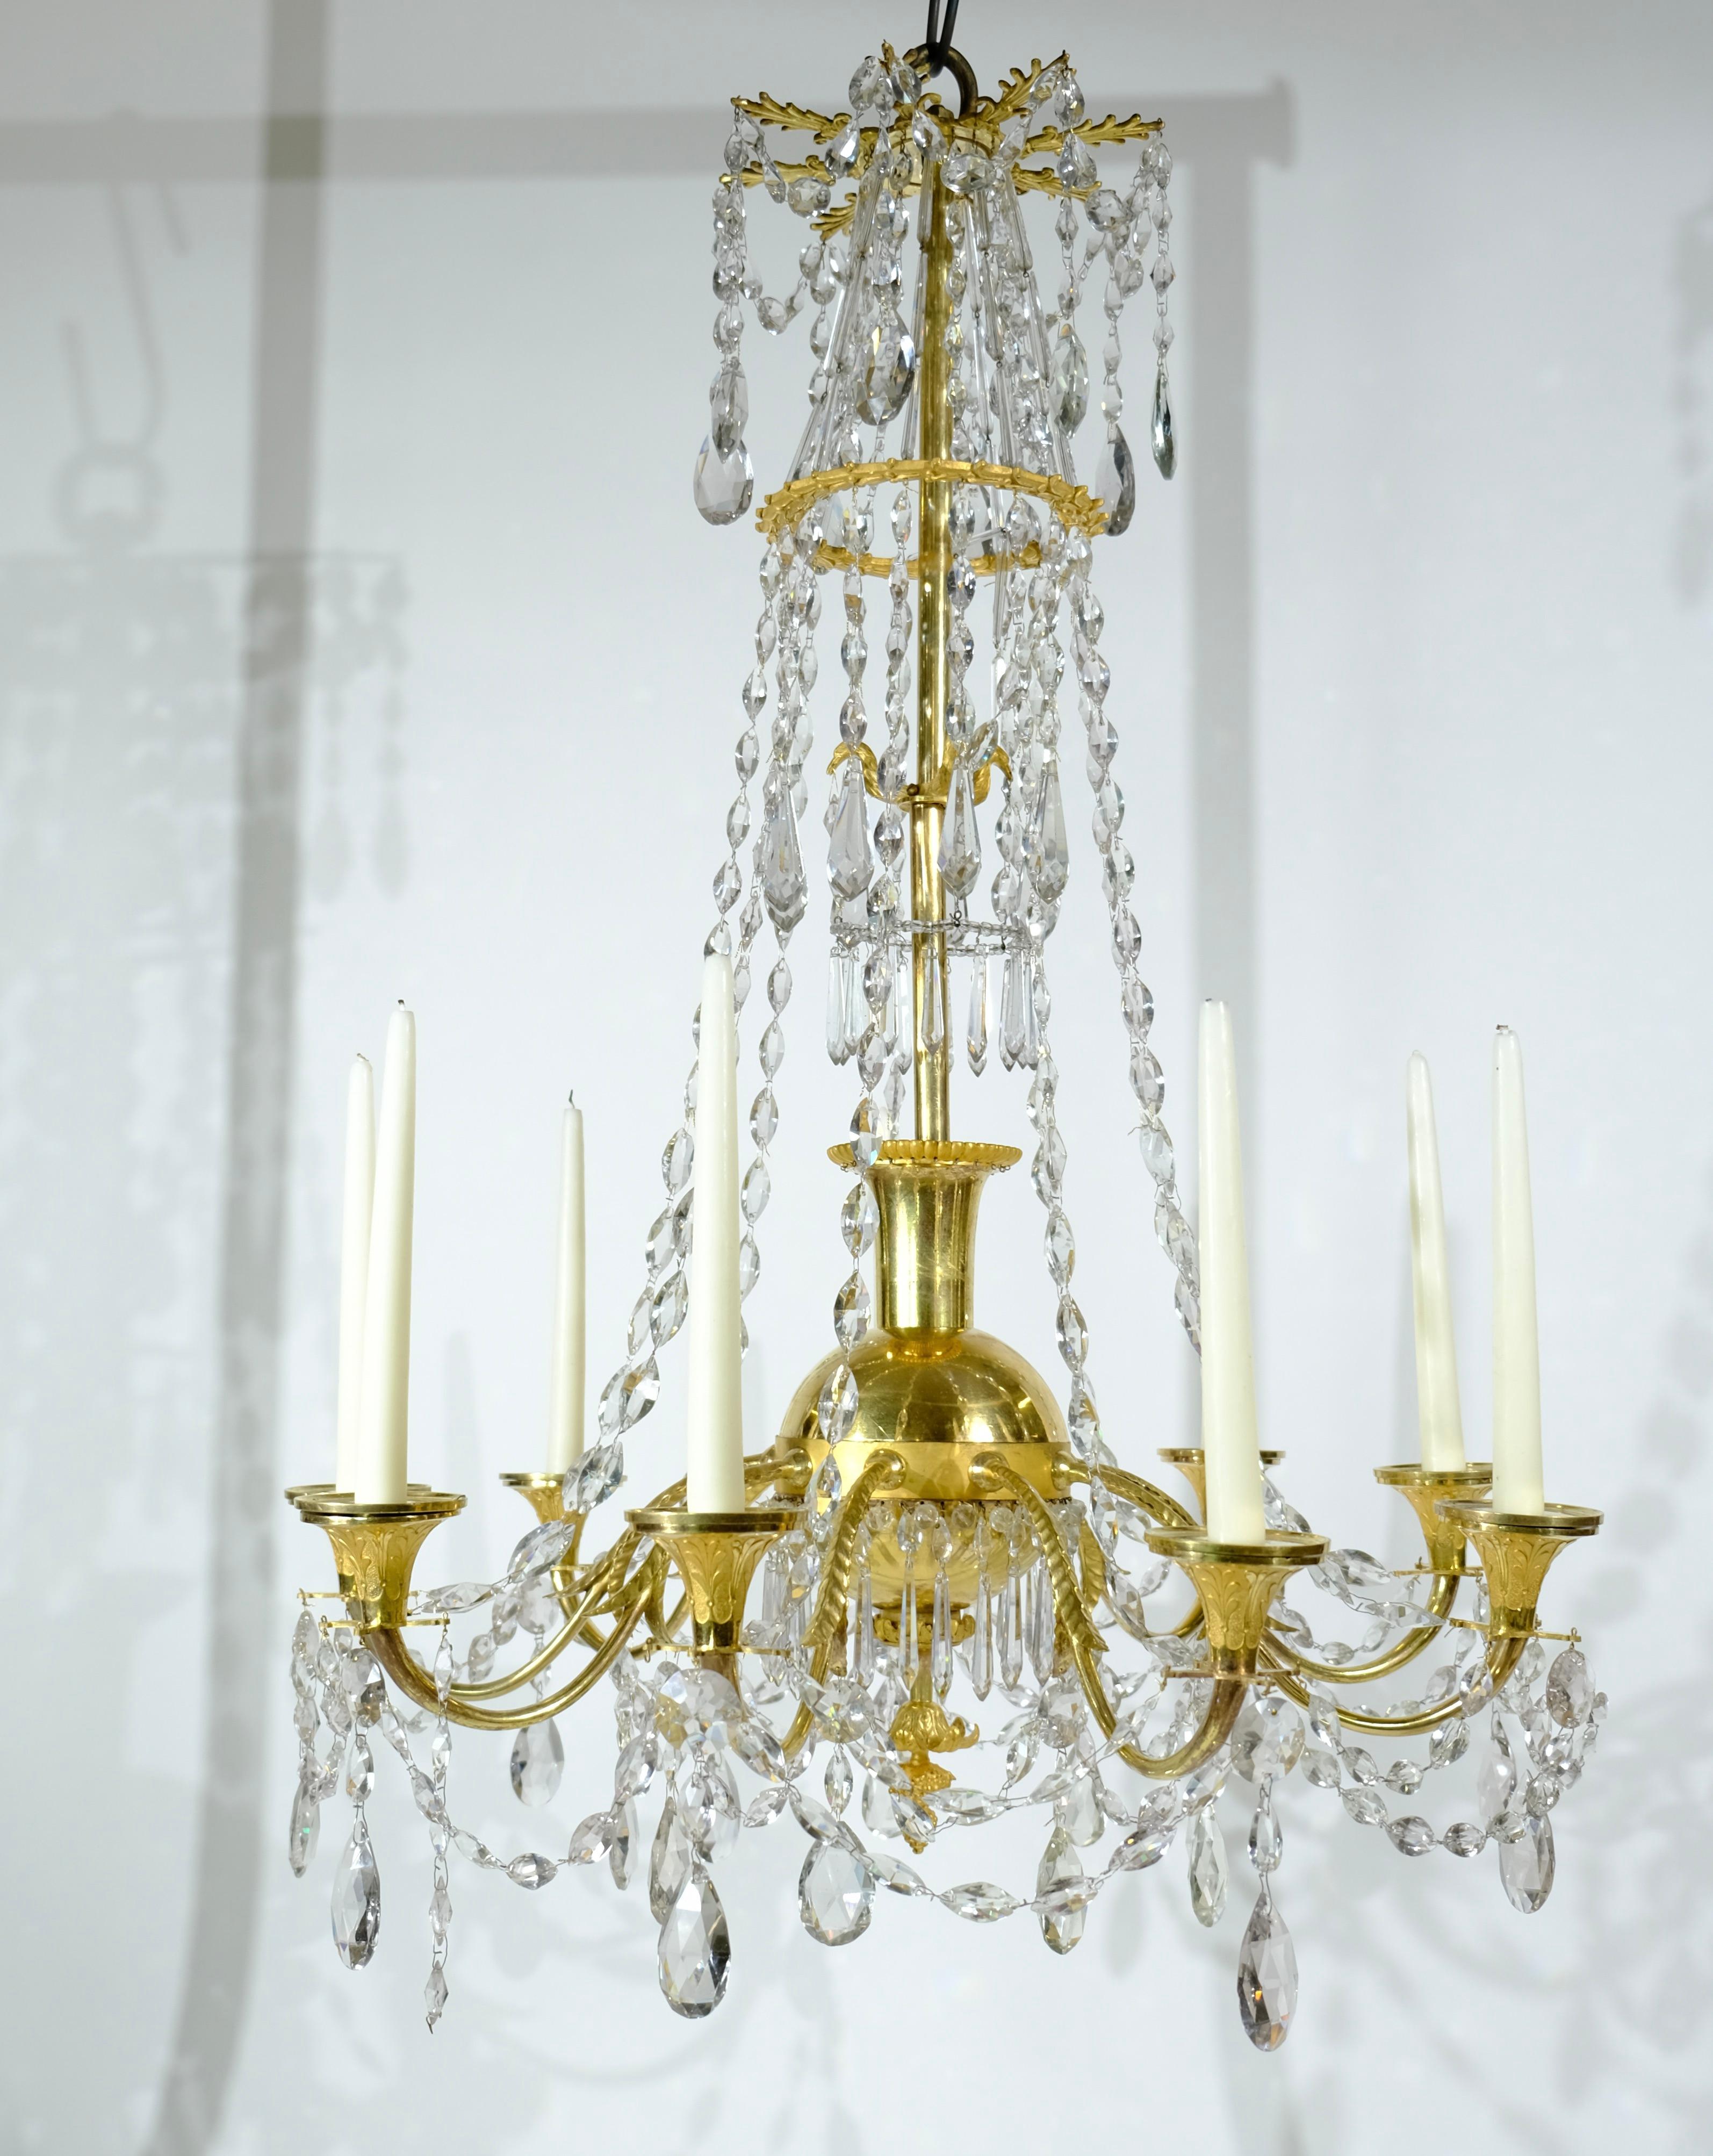 A high quality Directoire chandelier. All arms, candleholders and central stem are cast in bronze and then gilt. The quality of the craftsmanship is of the highest level. The crystals are beautifully arranged around the chandelier and also these are